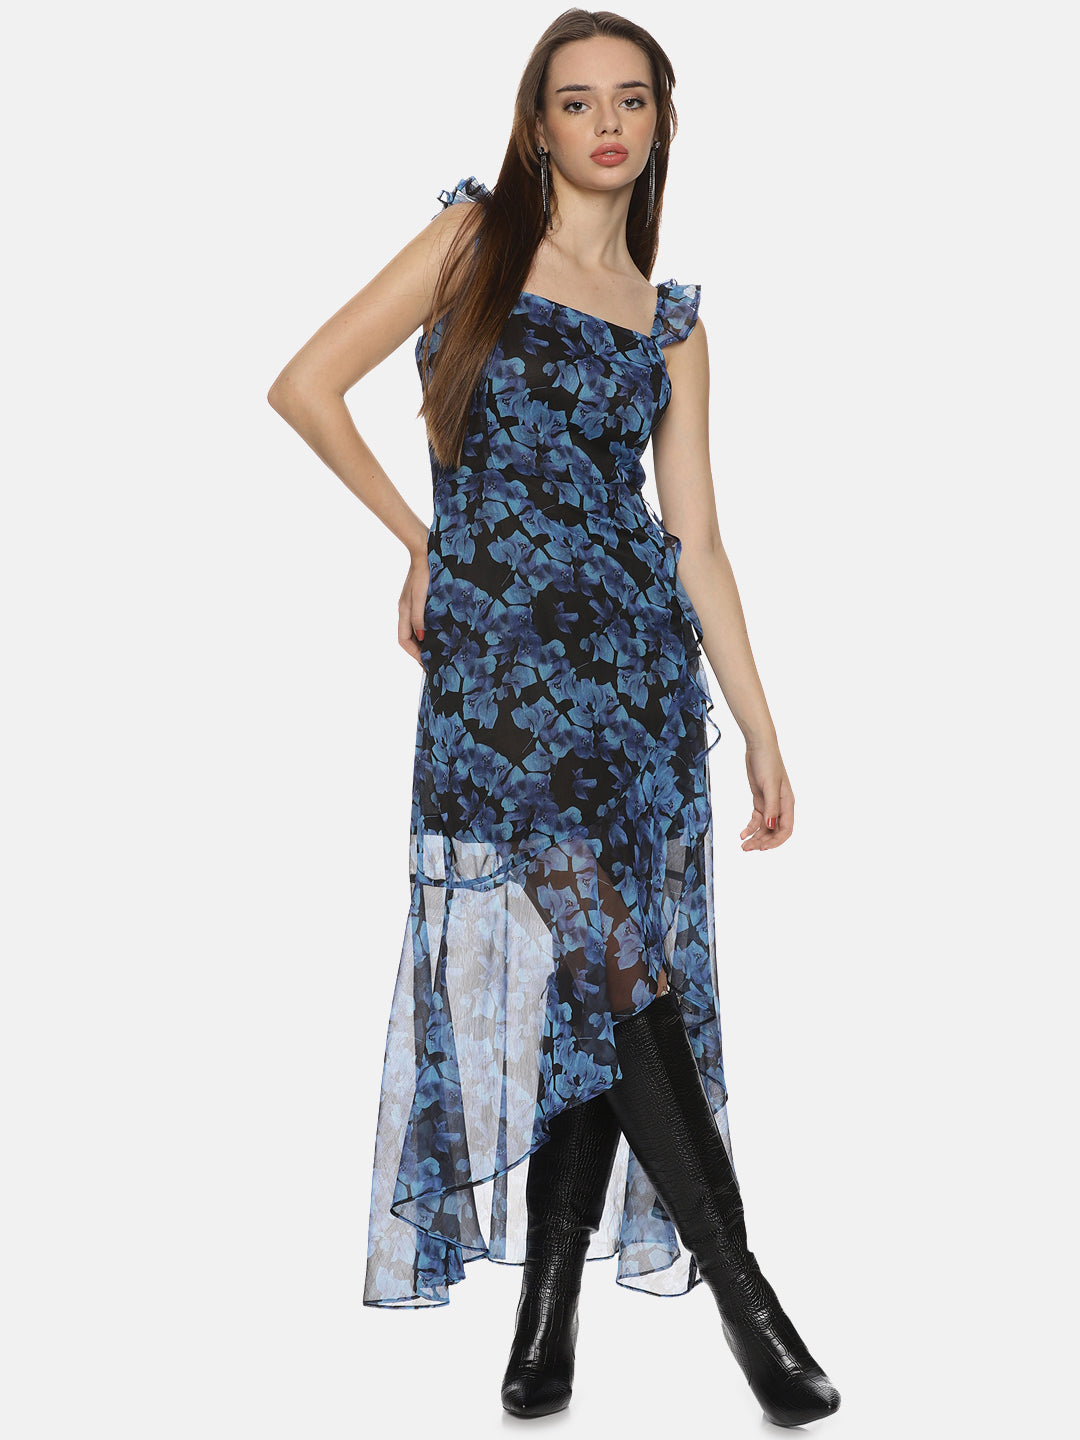 Buy Blue Printed Floral Chiffon Fabric | High Low Dress Online In India